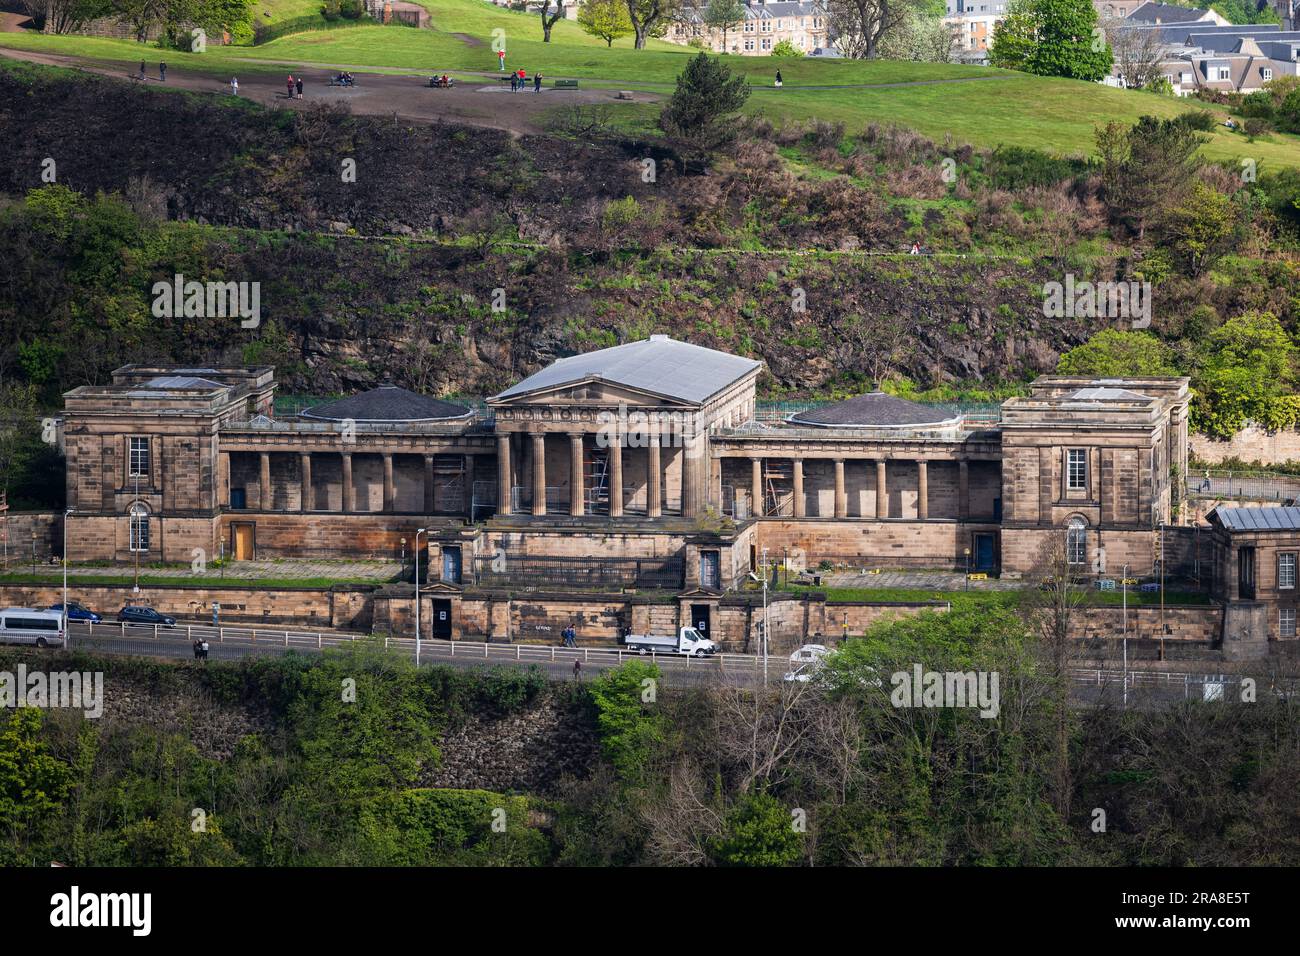 The Old Royal High School or New Parliament House, 19th-century Neoclassical building on Calton Hill in city of Edinburgh, Scotland, UK. Stock Photo